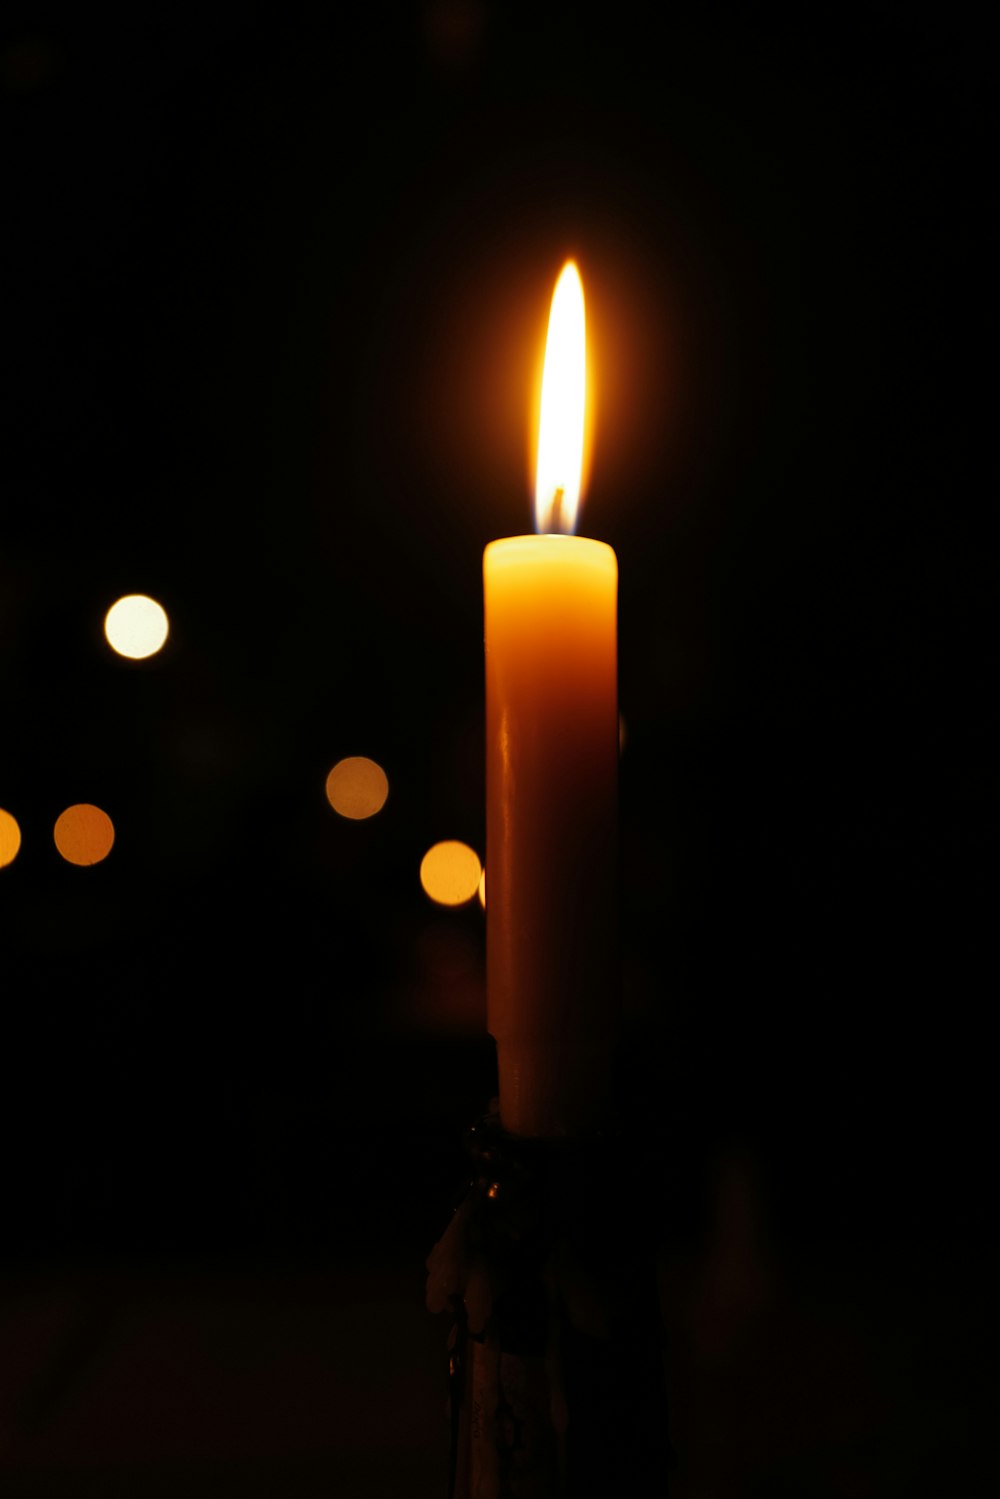 A lit candle in a dark room photo – Free Candle Image on Unsplash